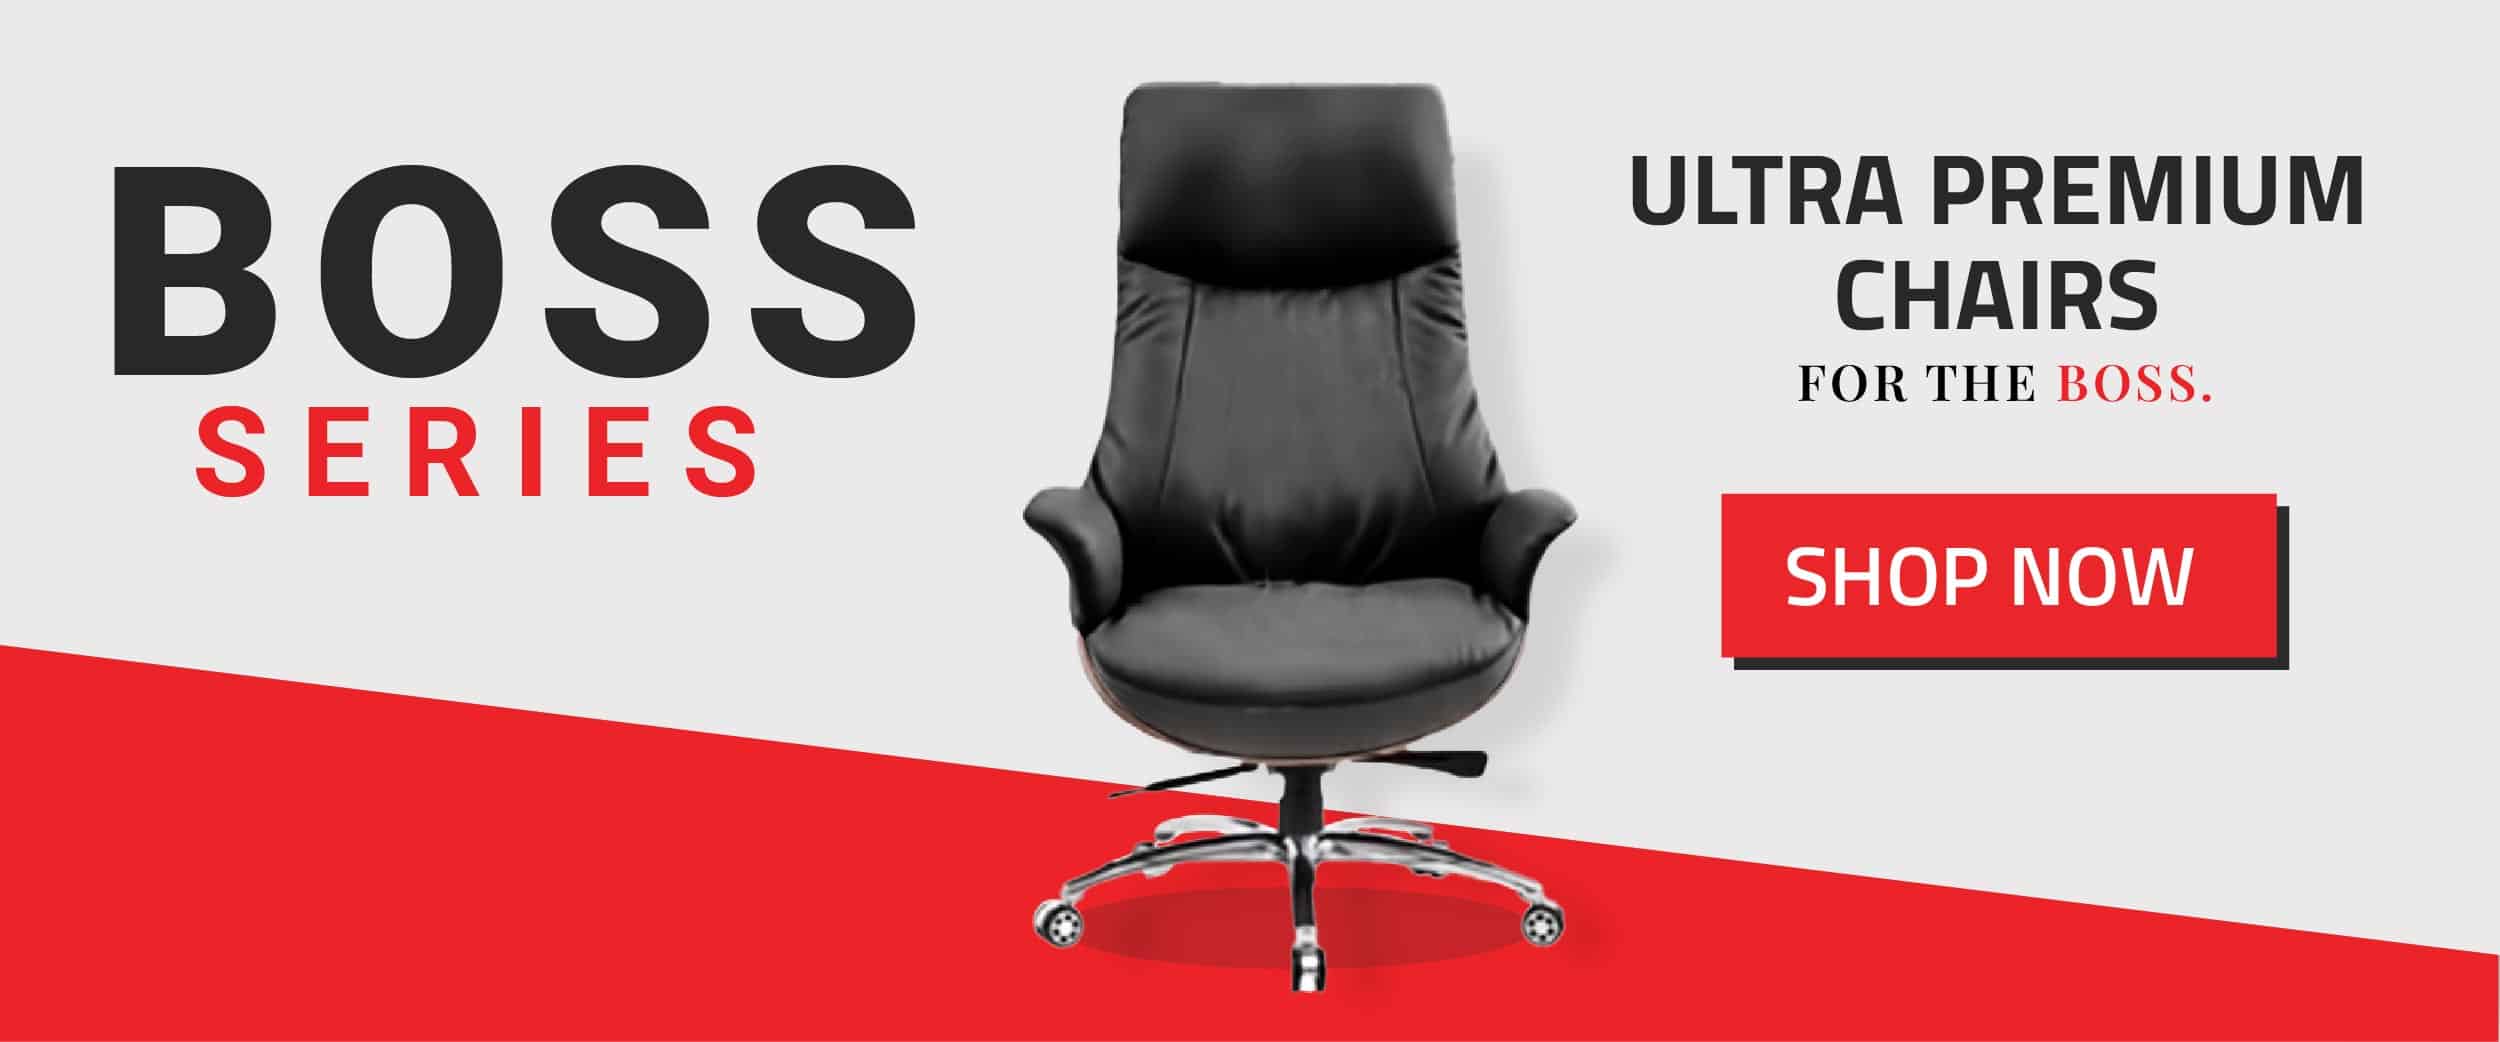 BOSS CHAIR: Ultra Premium Office Chairs for Boss in India